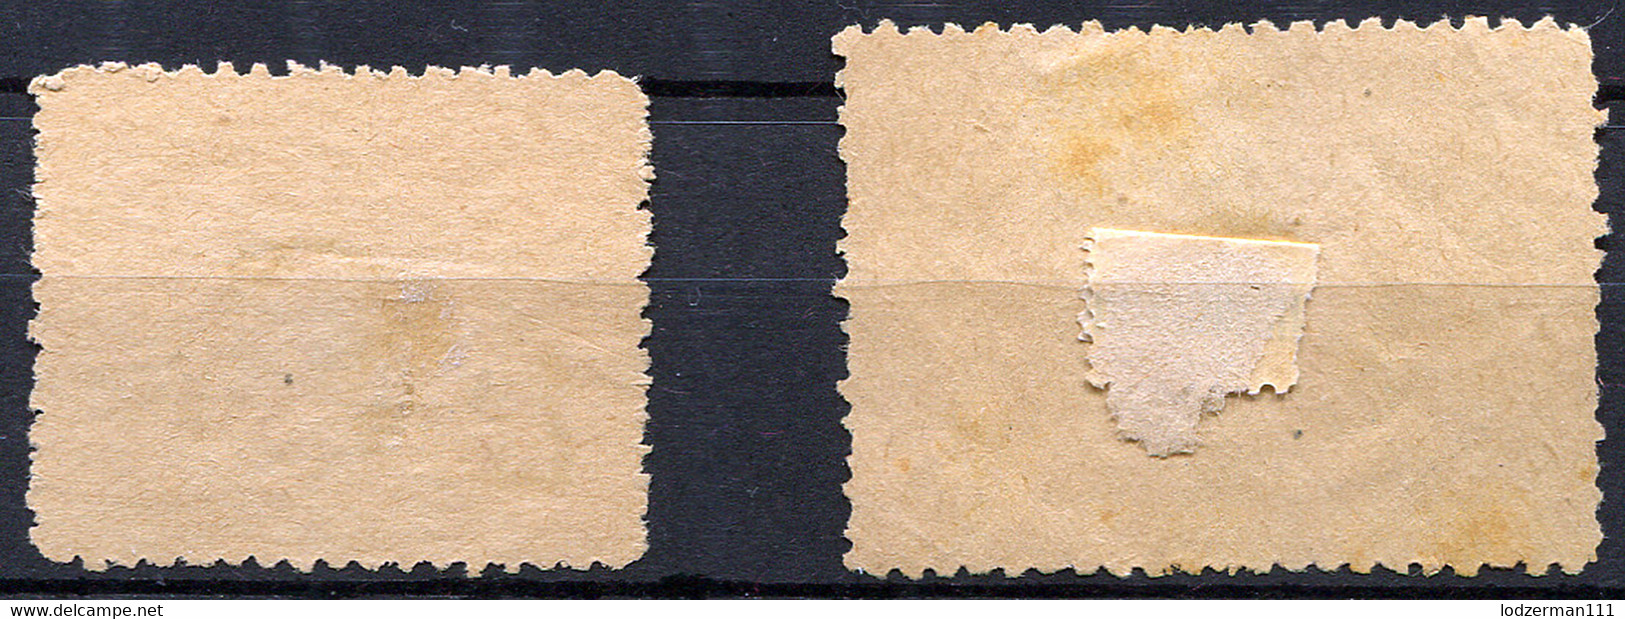 POLAND - Two Telegraph Labels (without Gum) Very Rare - Vignette